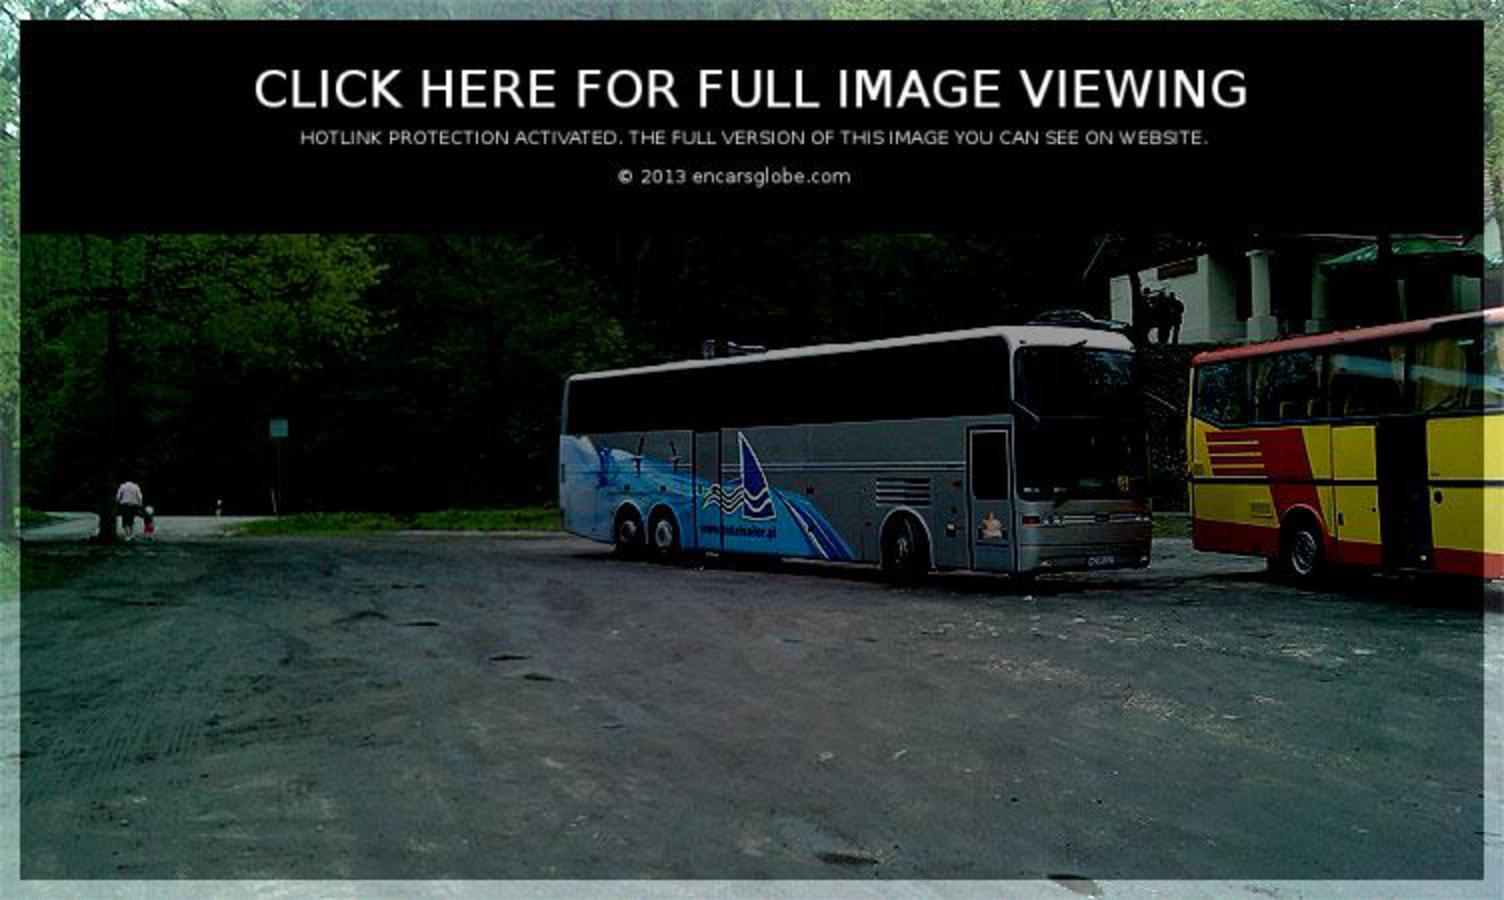 VanHool EOS 233: Photo gallery, complete information about model ...